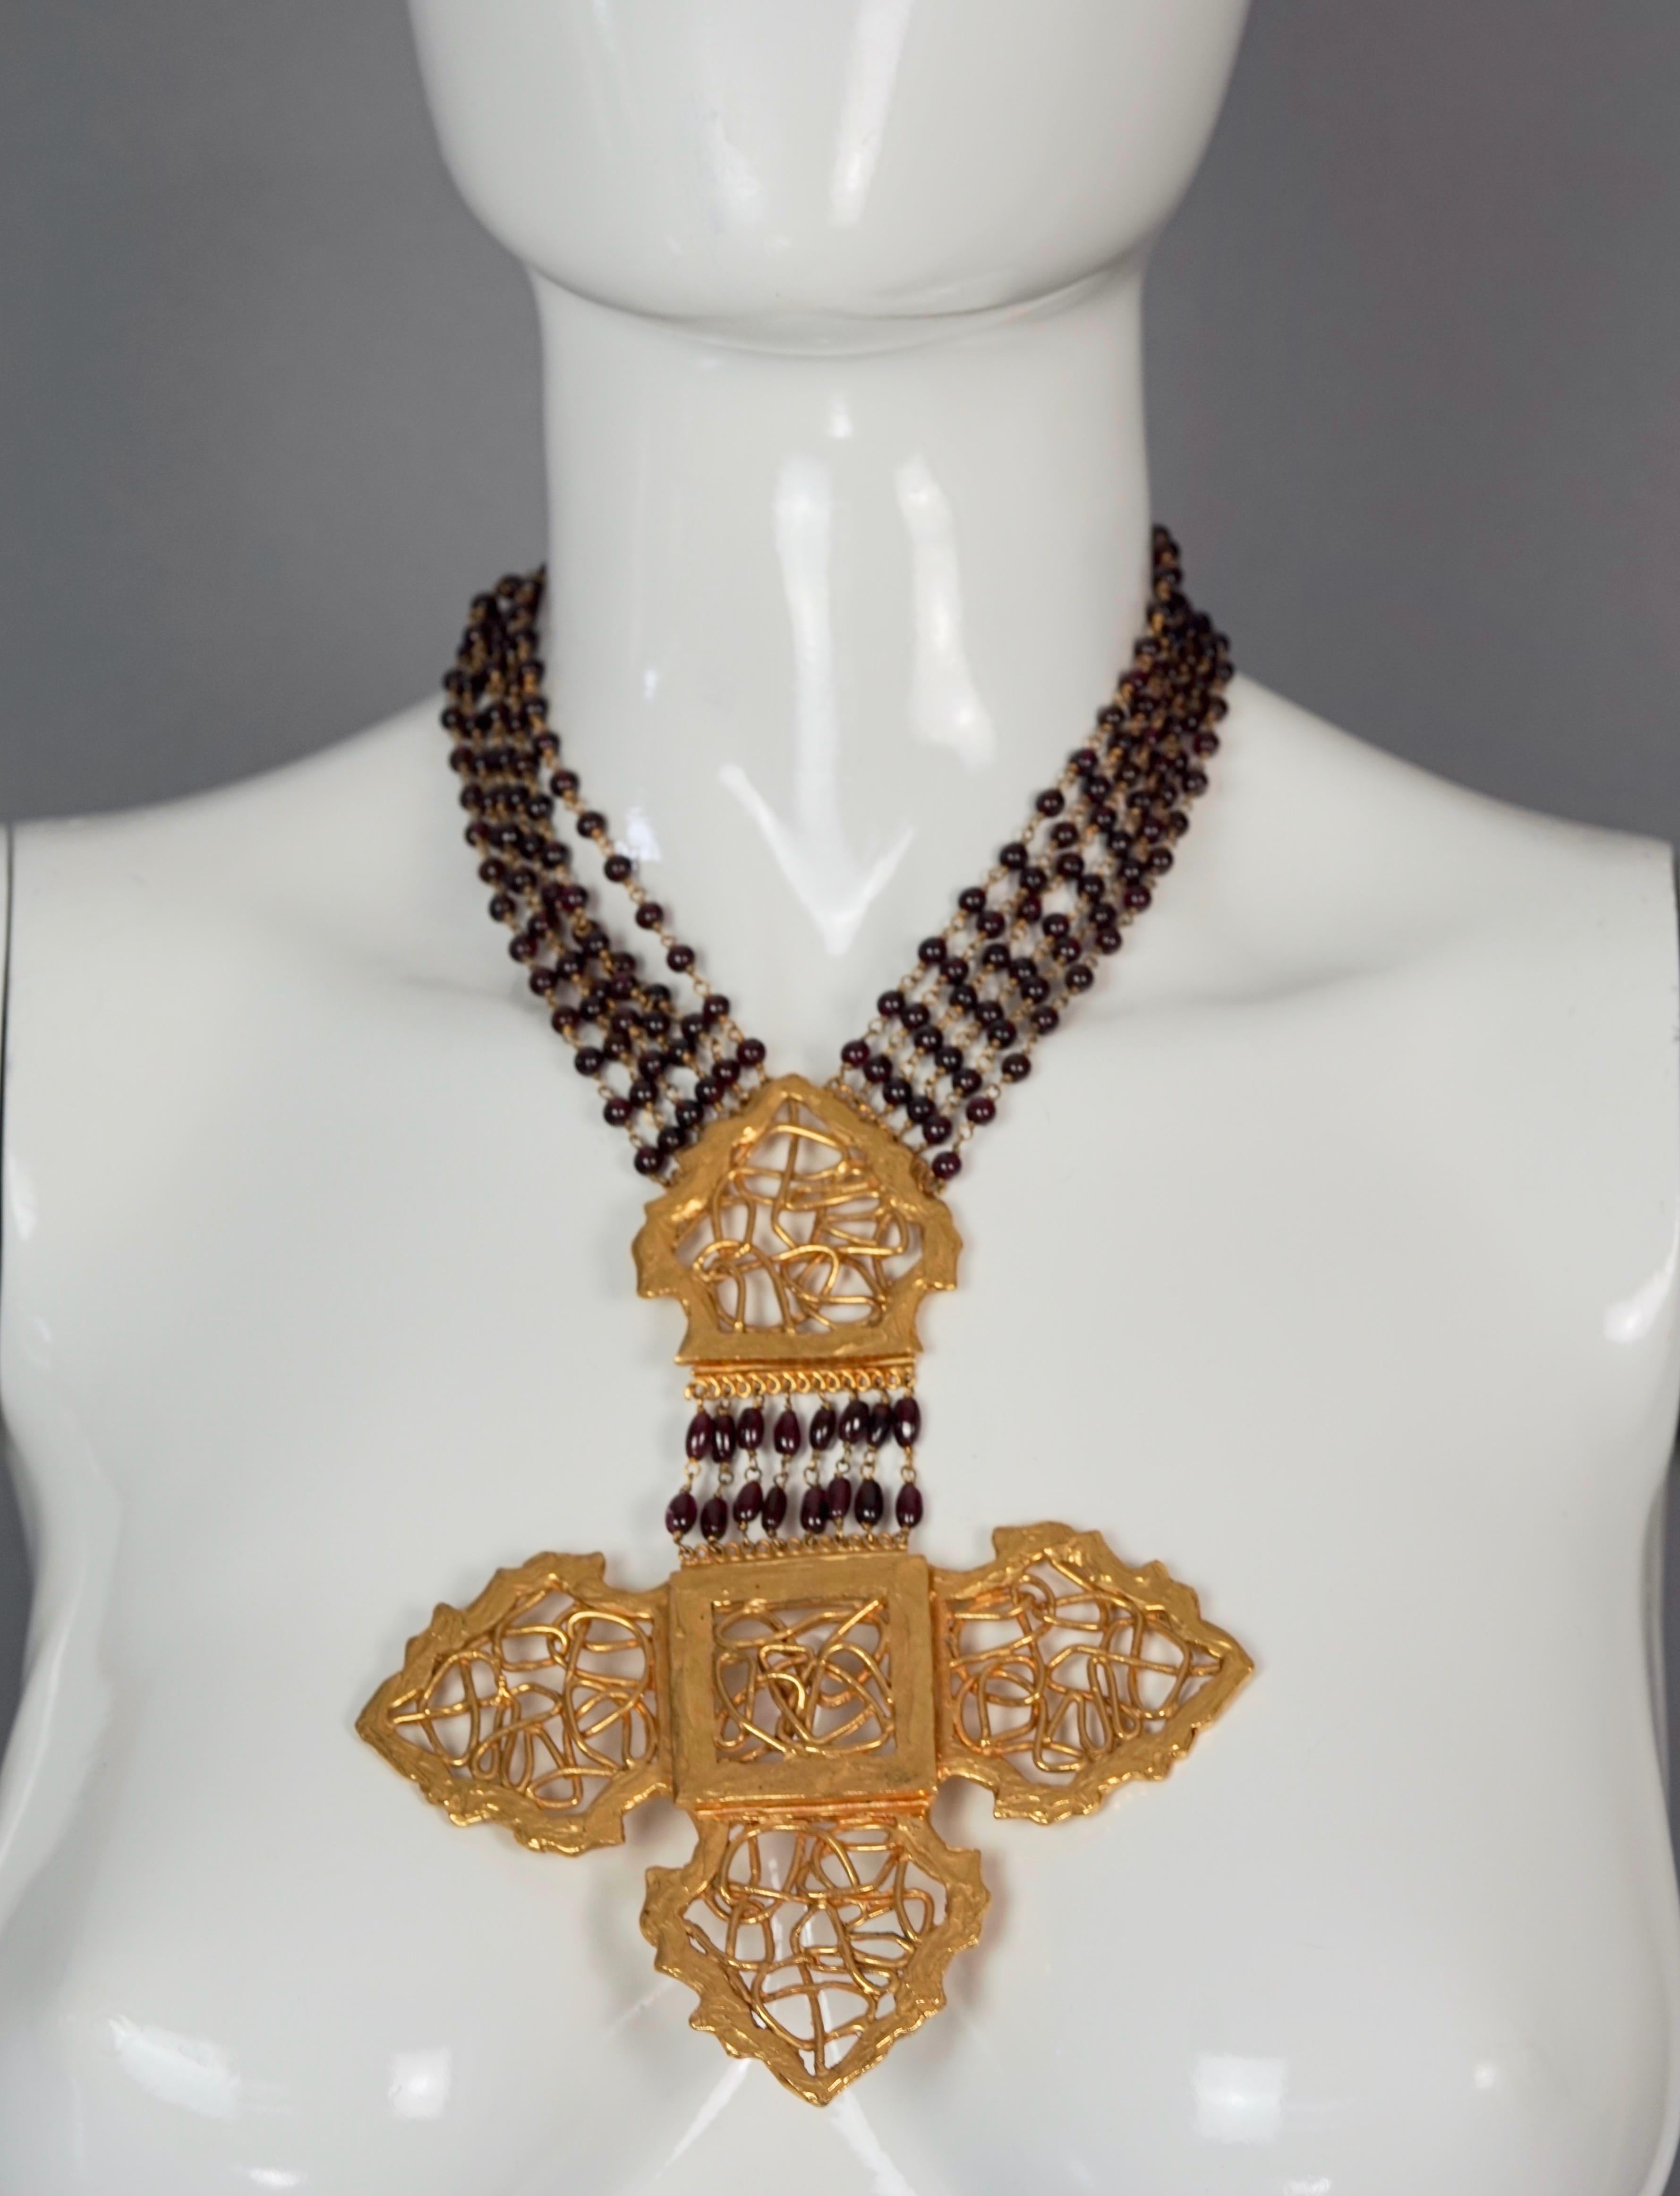 Vintage Massive ROBERT GOOSSENS PARIS Gilt Cross Multi Strand Glass Beaded Necklace

Measurements:
Cross Height: 6.38 inches (16.2 cm)
Cross Width: 5.20 inches (13.2 cm)
Wearable Length: 14.17 inches (36 cm)

Features:
- 100% Authentic ROBERT